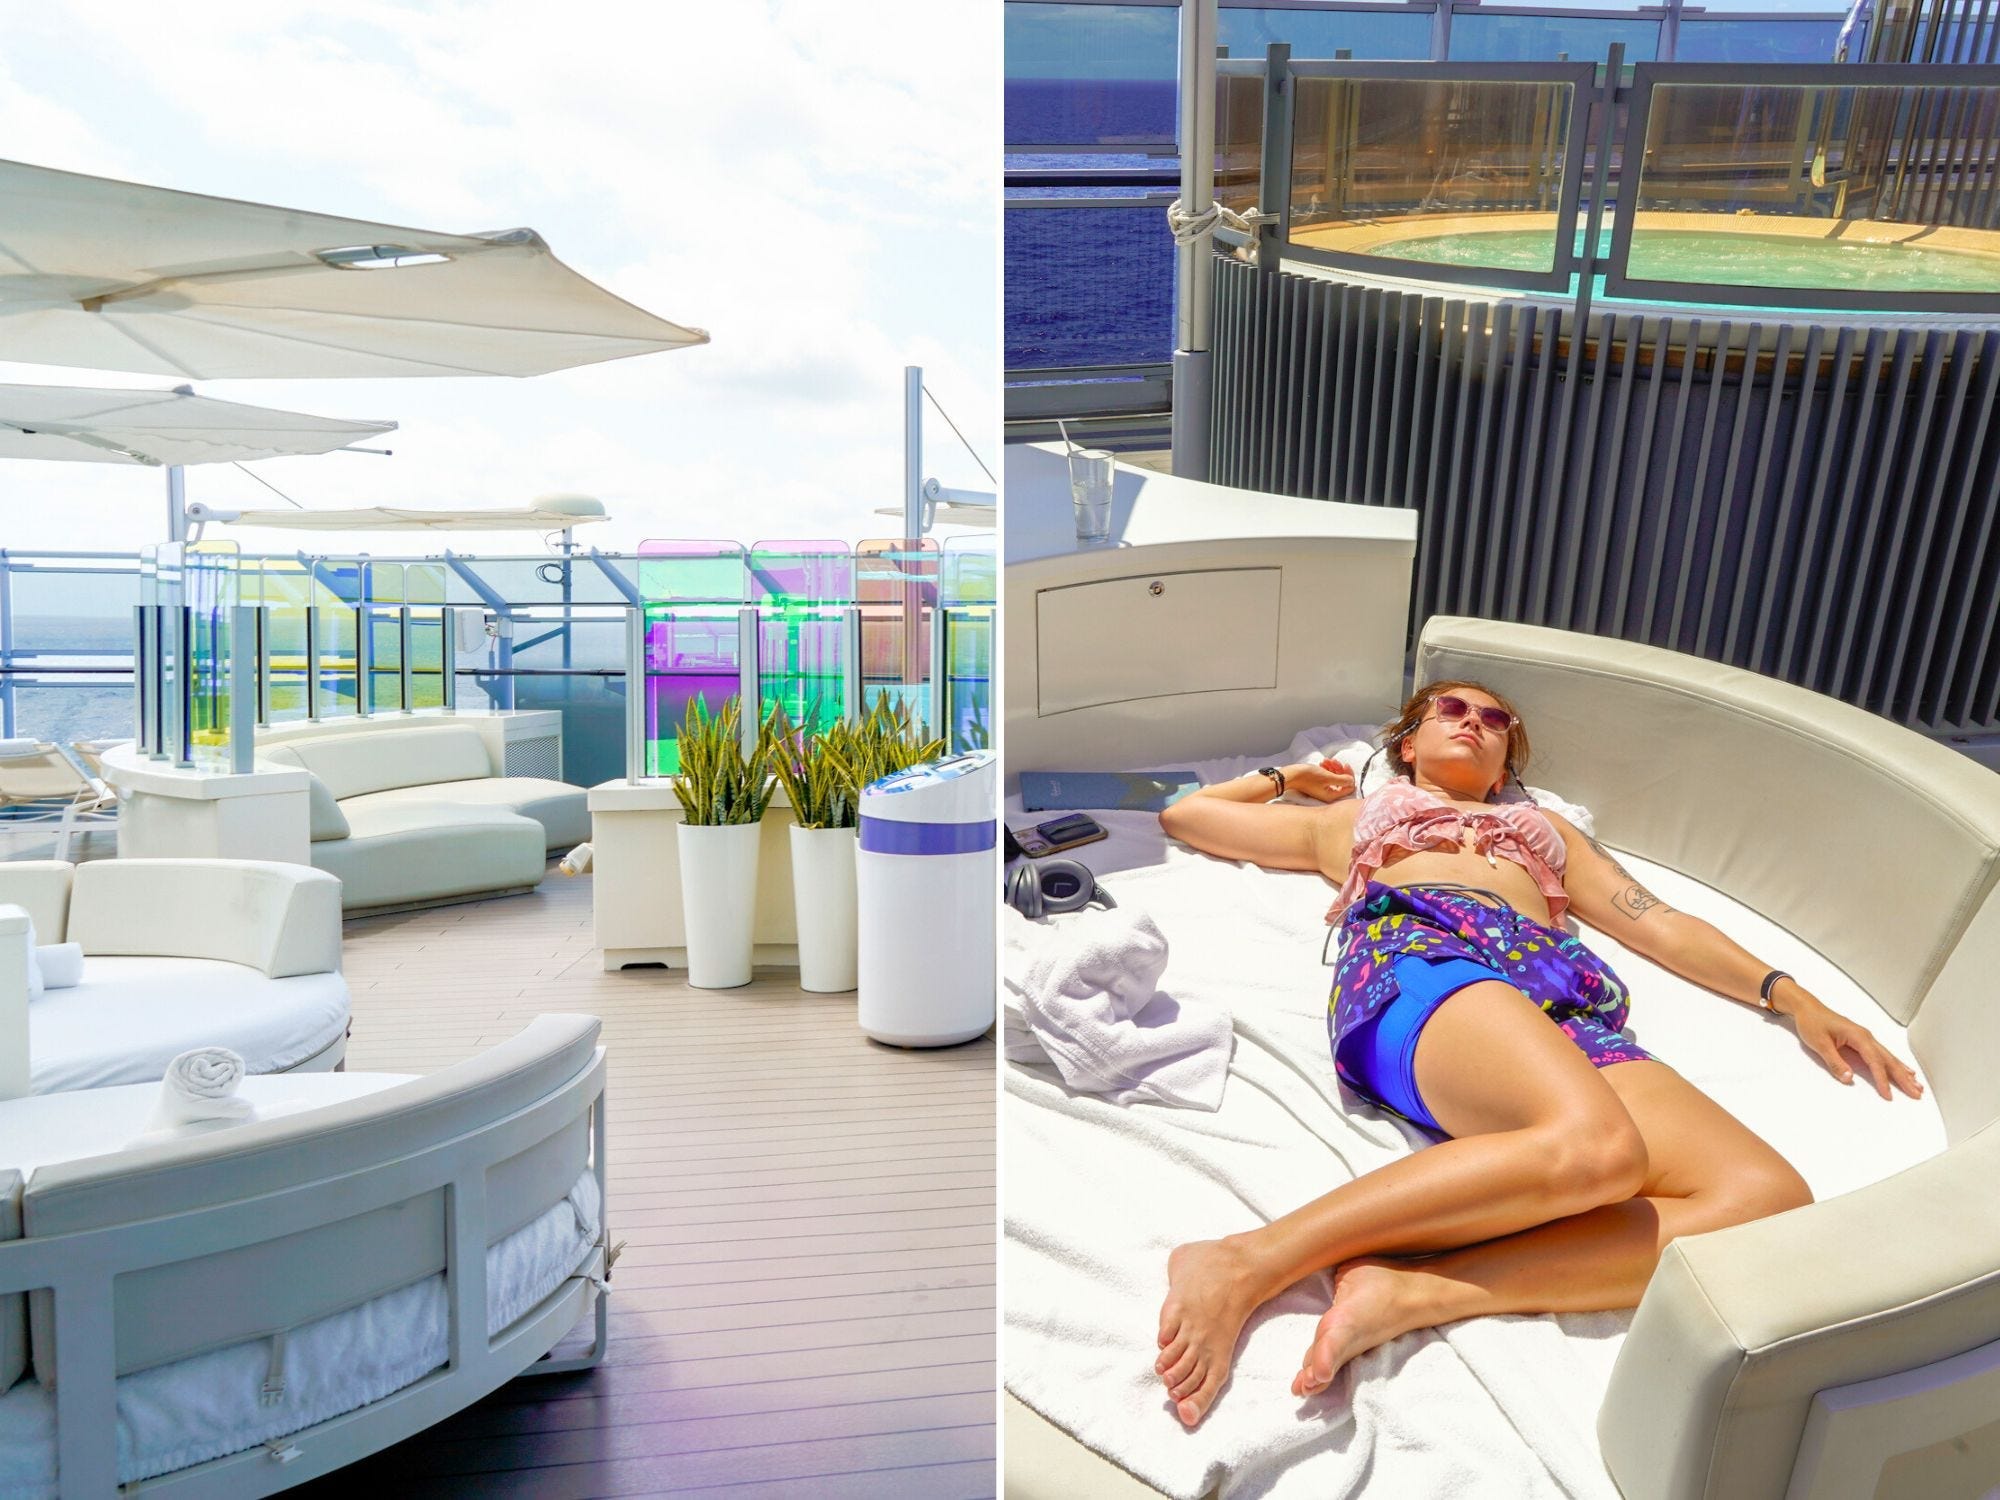 <ul class="summary-list"> <li>I cruised with Virgin Voyages and spent some afternoons on Richard's Rooftop, the ship's VIP lounge.</li> <li>At the front of deck 16, Richard's Rooftop was full of cabanas and round, shaded beds.</li> <li>The rooftop had a full-service bar and two hot tubs that were often empty. </li> </ul><p>A plethora of empty beds to choose from on a quiet deck with ocean views and full food and drink service — this was my luxurious experience on Richard's Rooftop. </p><p>Richard's Rooftop is the VIP lounge on board <a href="https://www.insider.com/virgin-voyages-sea-terrace-room-balcony-photo-cruise-cabin-tour-2023-8" rel="">Virgin Voyages' cruise ships</a>. The rooftop is reserved for passengers staying in suites — known as "Rockstars" <a href="https://www.virginvoyages.com/cabins/suites" rel="nofollow noopener">by the cruise line</a>. </p><p>During a recent cruise on Virgin Voyages' Valiant Lady, I got access to the exclusive area. To me, it was easily the most relaxing part of the ship. </p><div class="read-original">Read the original article on <a href="https://www.insider.com/virgin-voyages-richards-rooftop-vip-cruise-lounge-tour-2023-8">Insider</a></div>